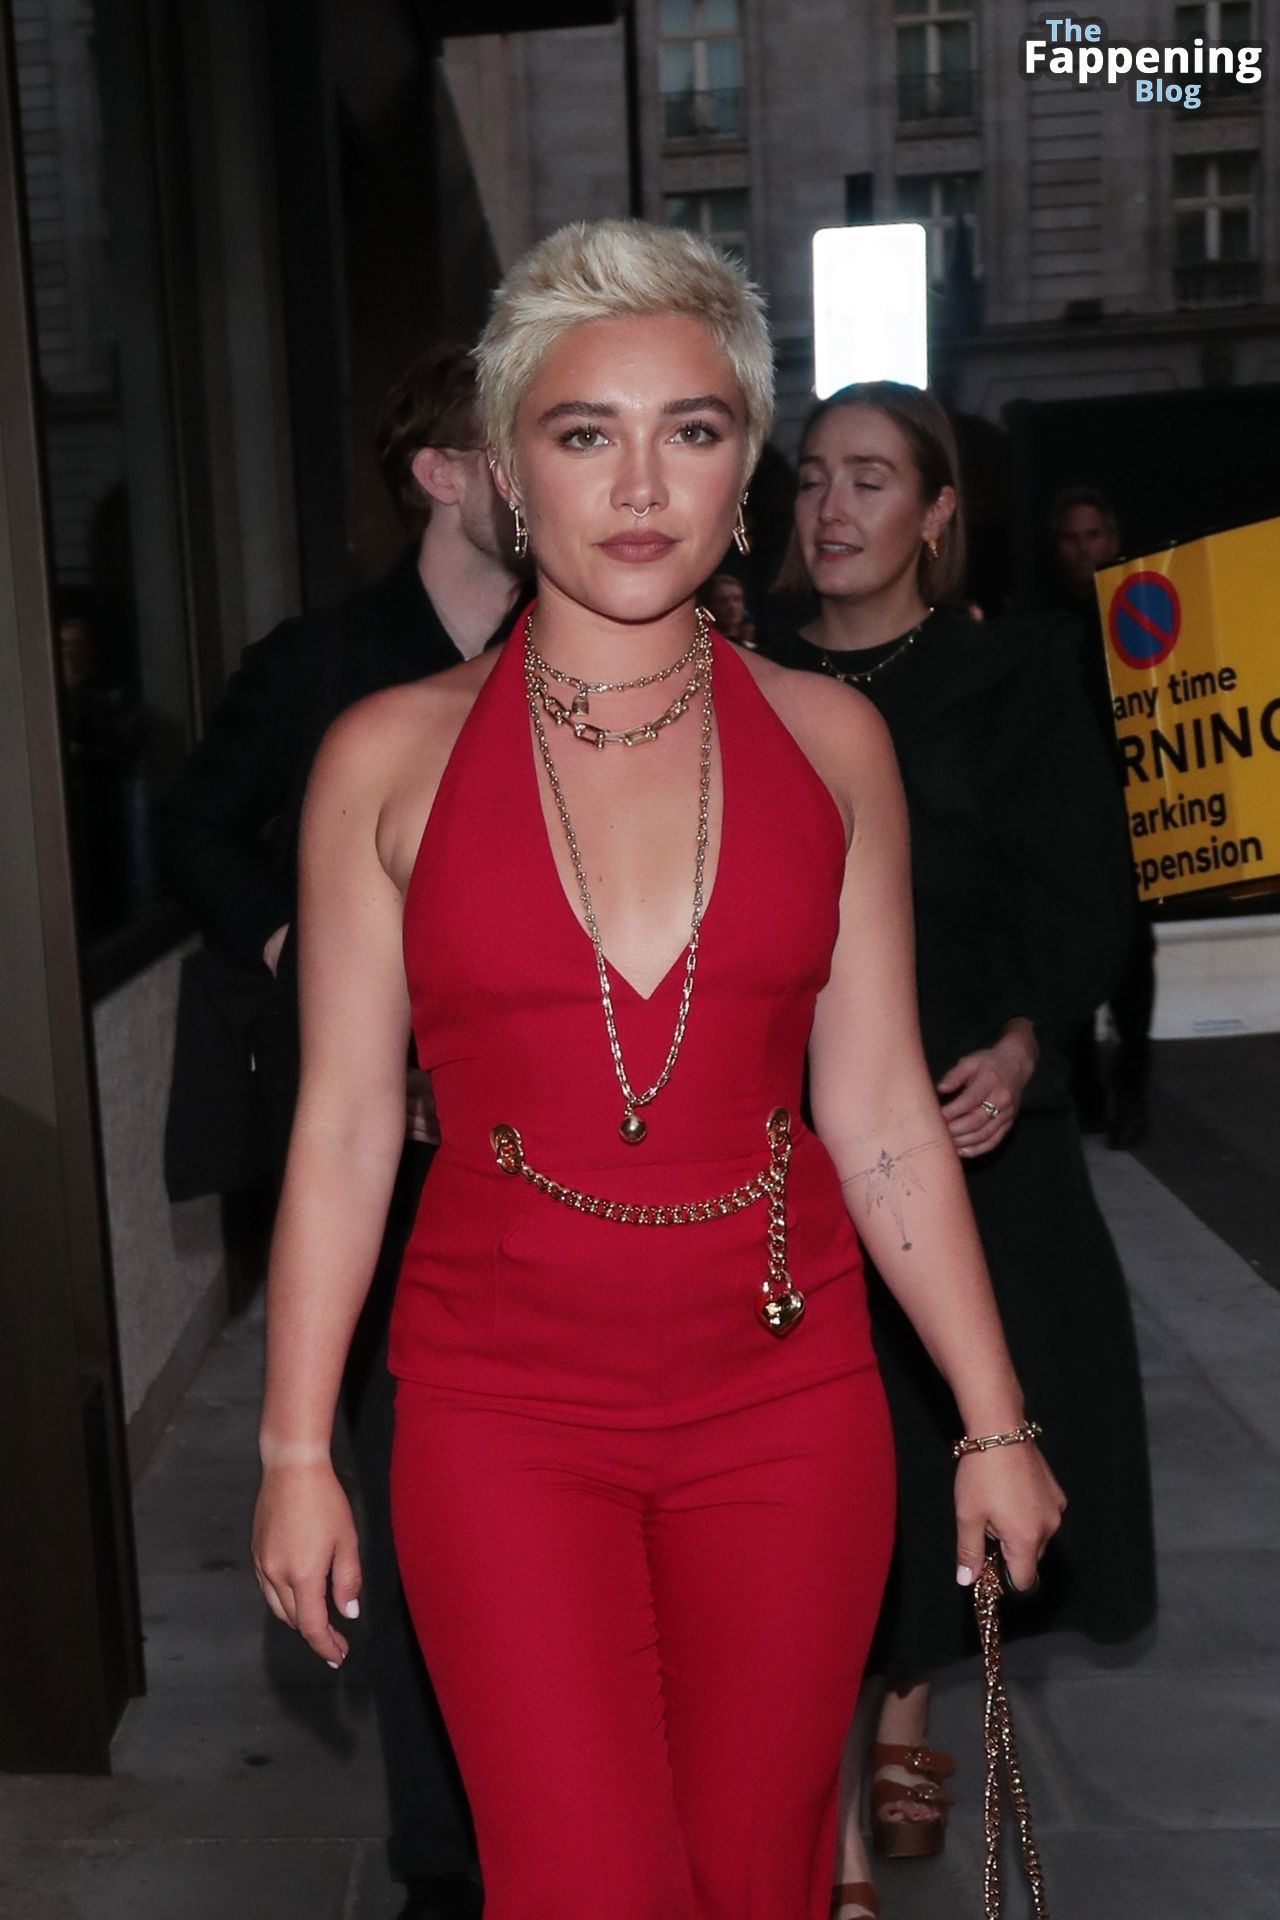 Florence-Pugh-Sexy-The-Fappening-Blog-10-1.jpg